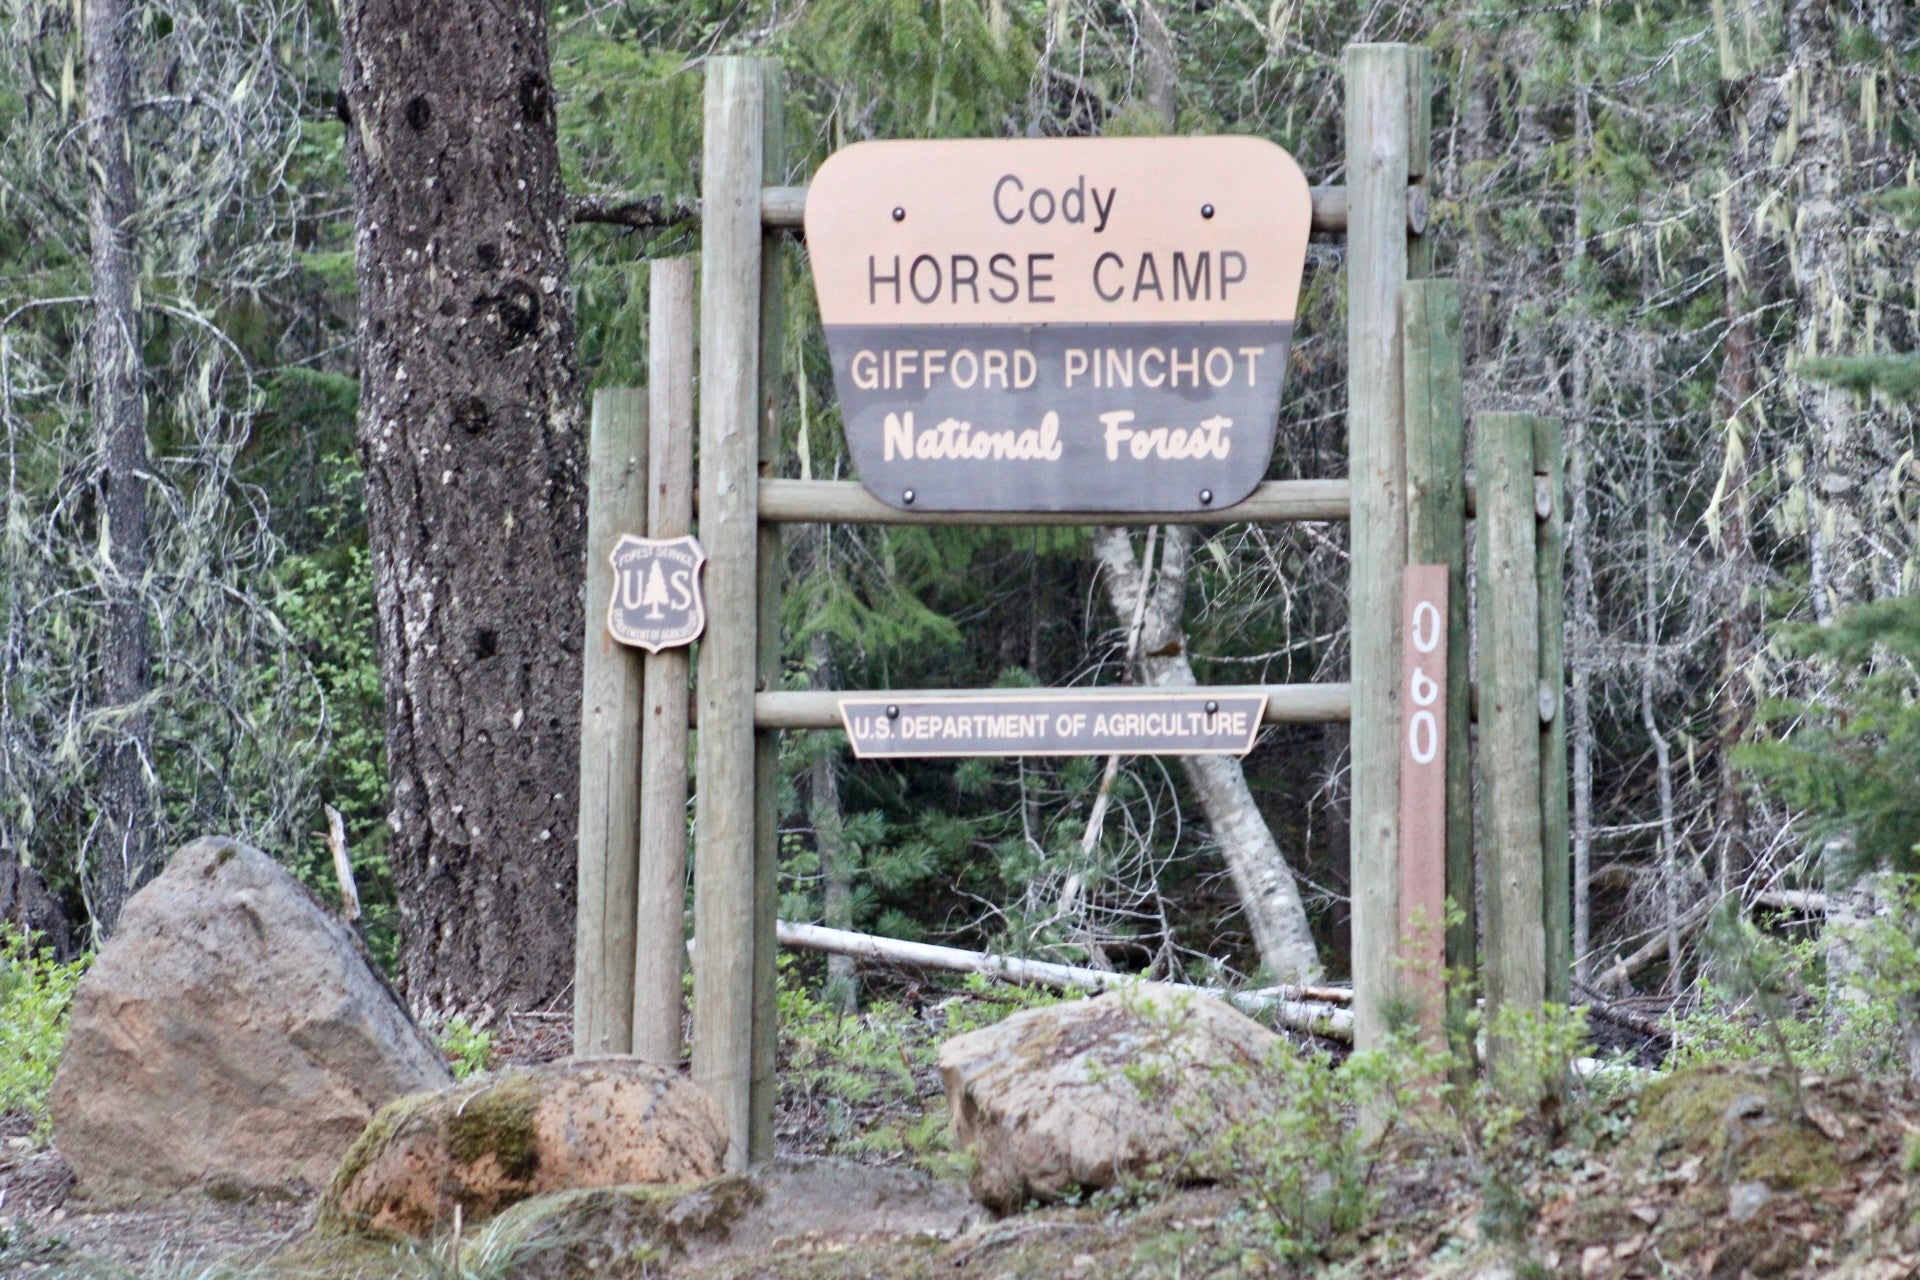 Camper submitted image from Horse Camp: Cody - 4